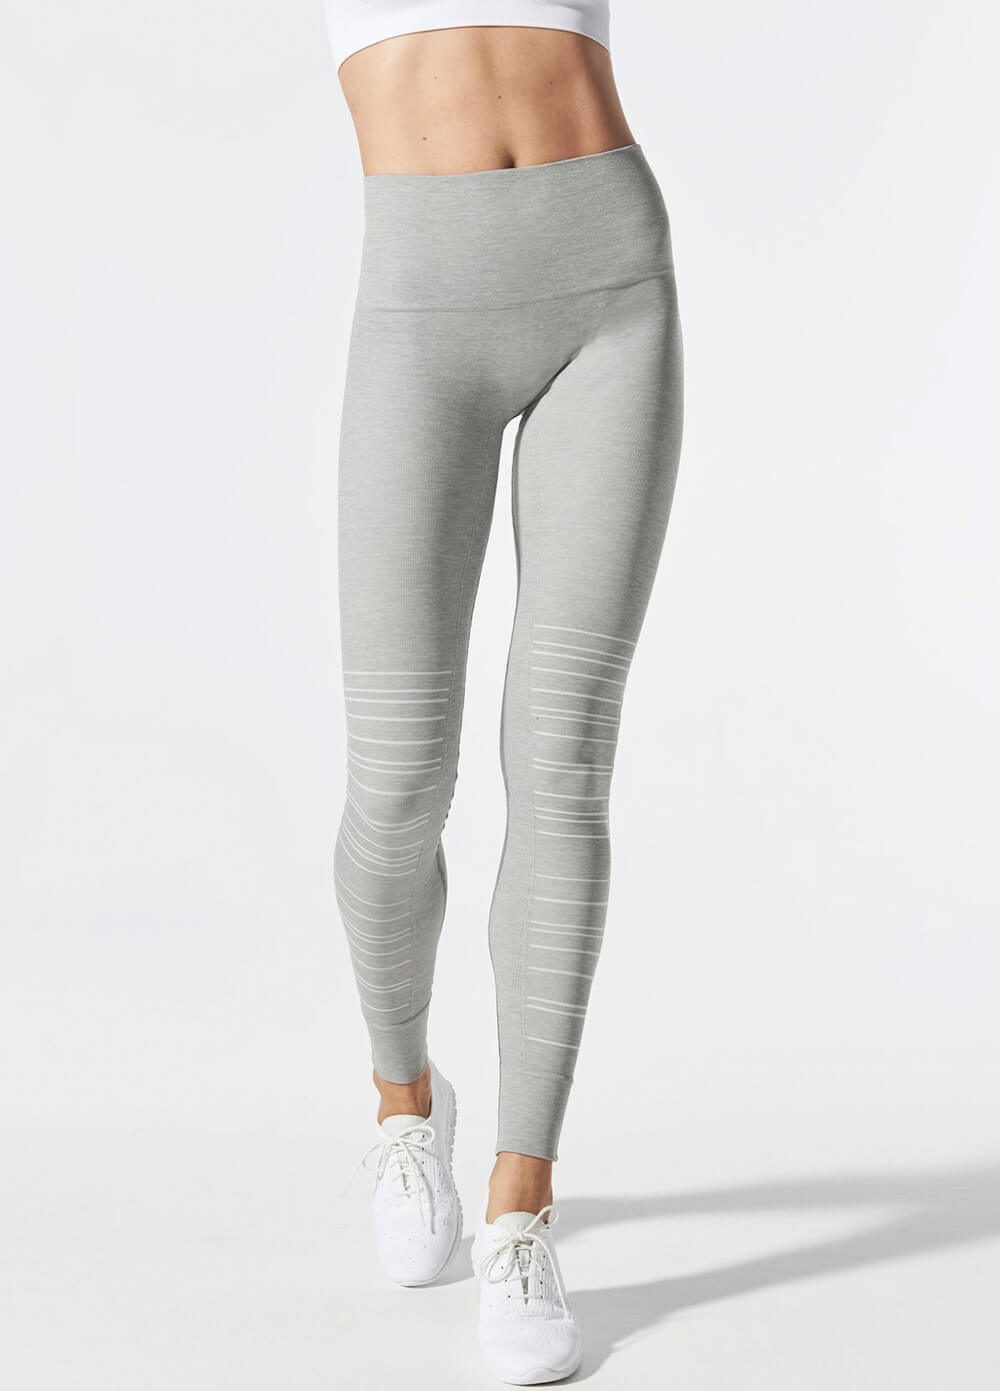 SportSupport Hipster Cuffed Motherhood Legging by Blanqi